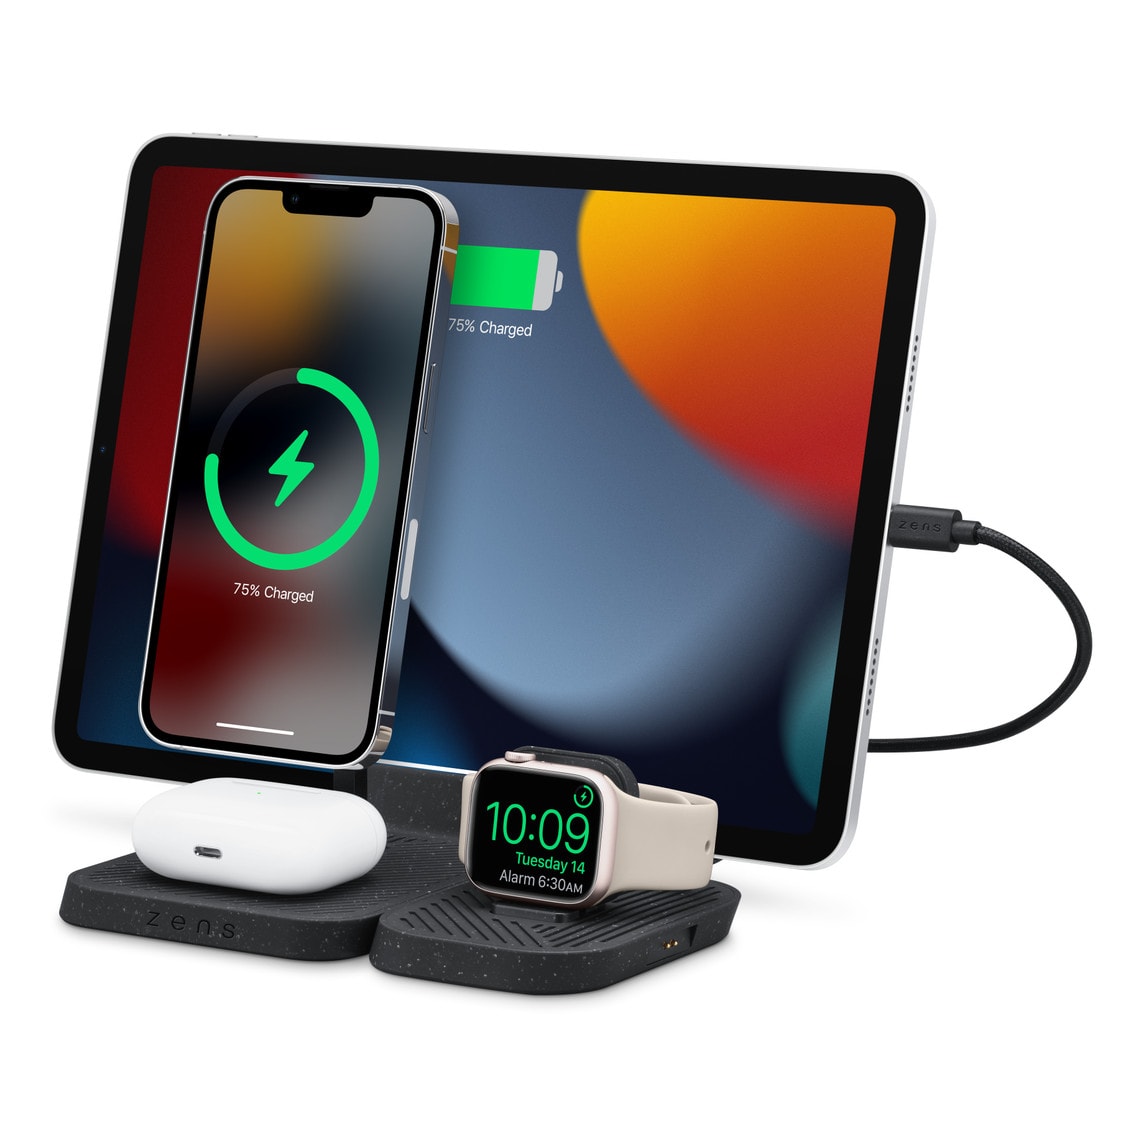 Zens' new modular charger for 3 or 4 devices is now on sale at Apple.